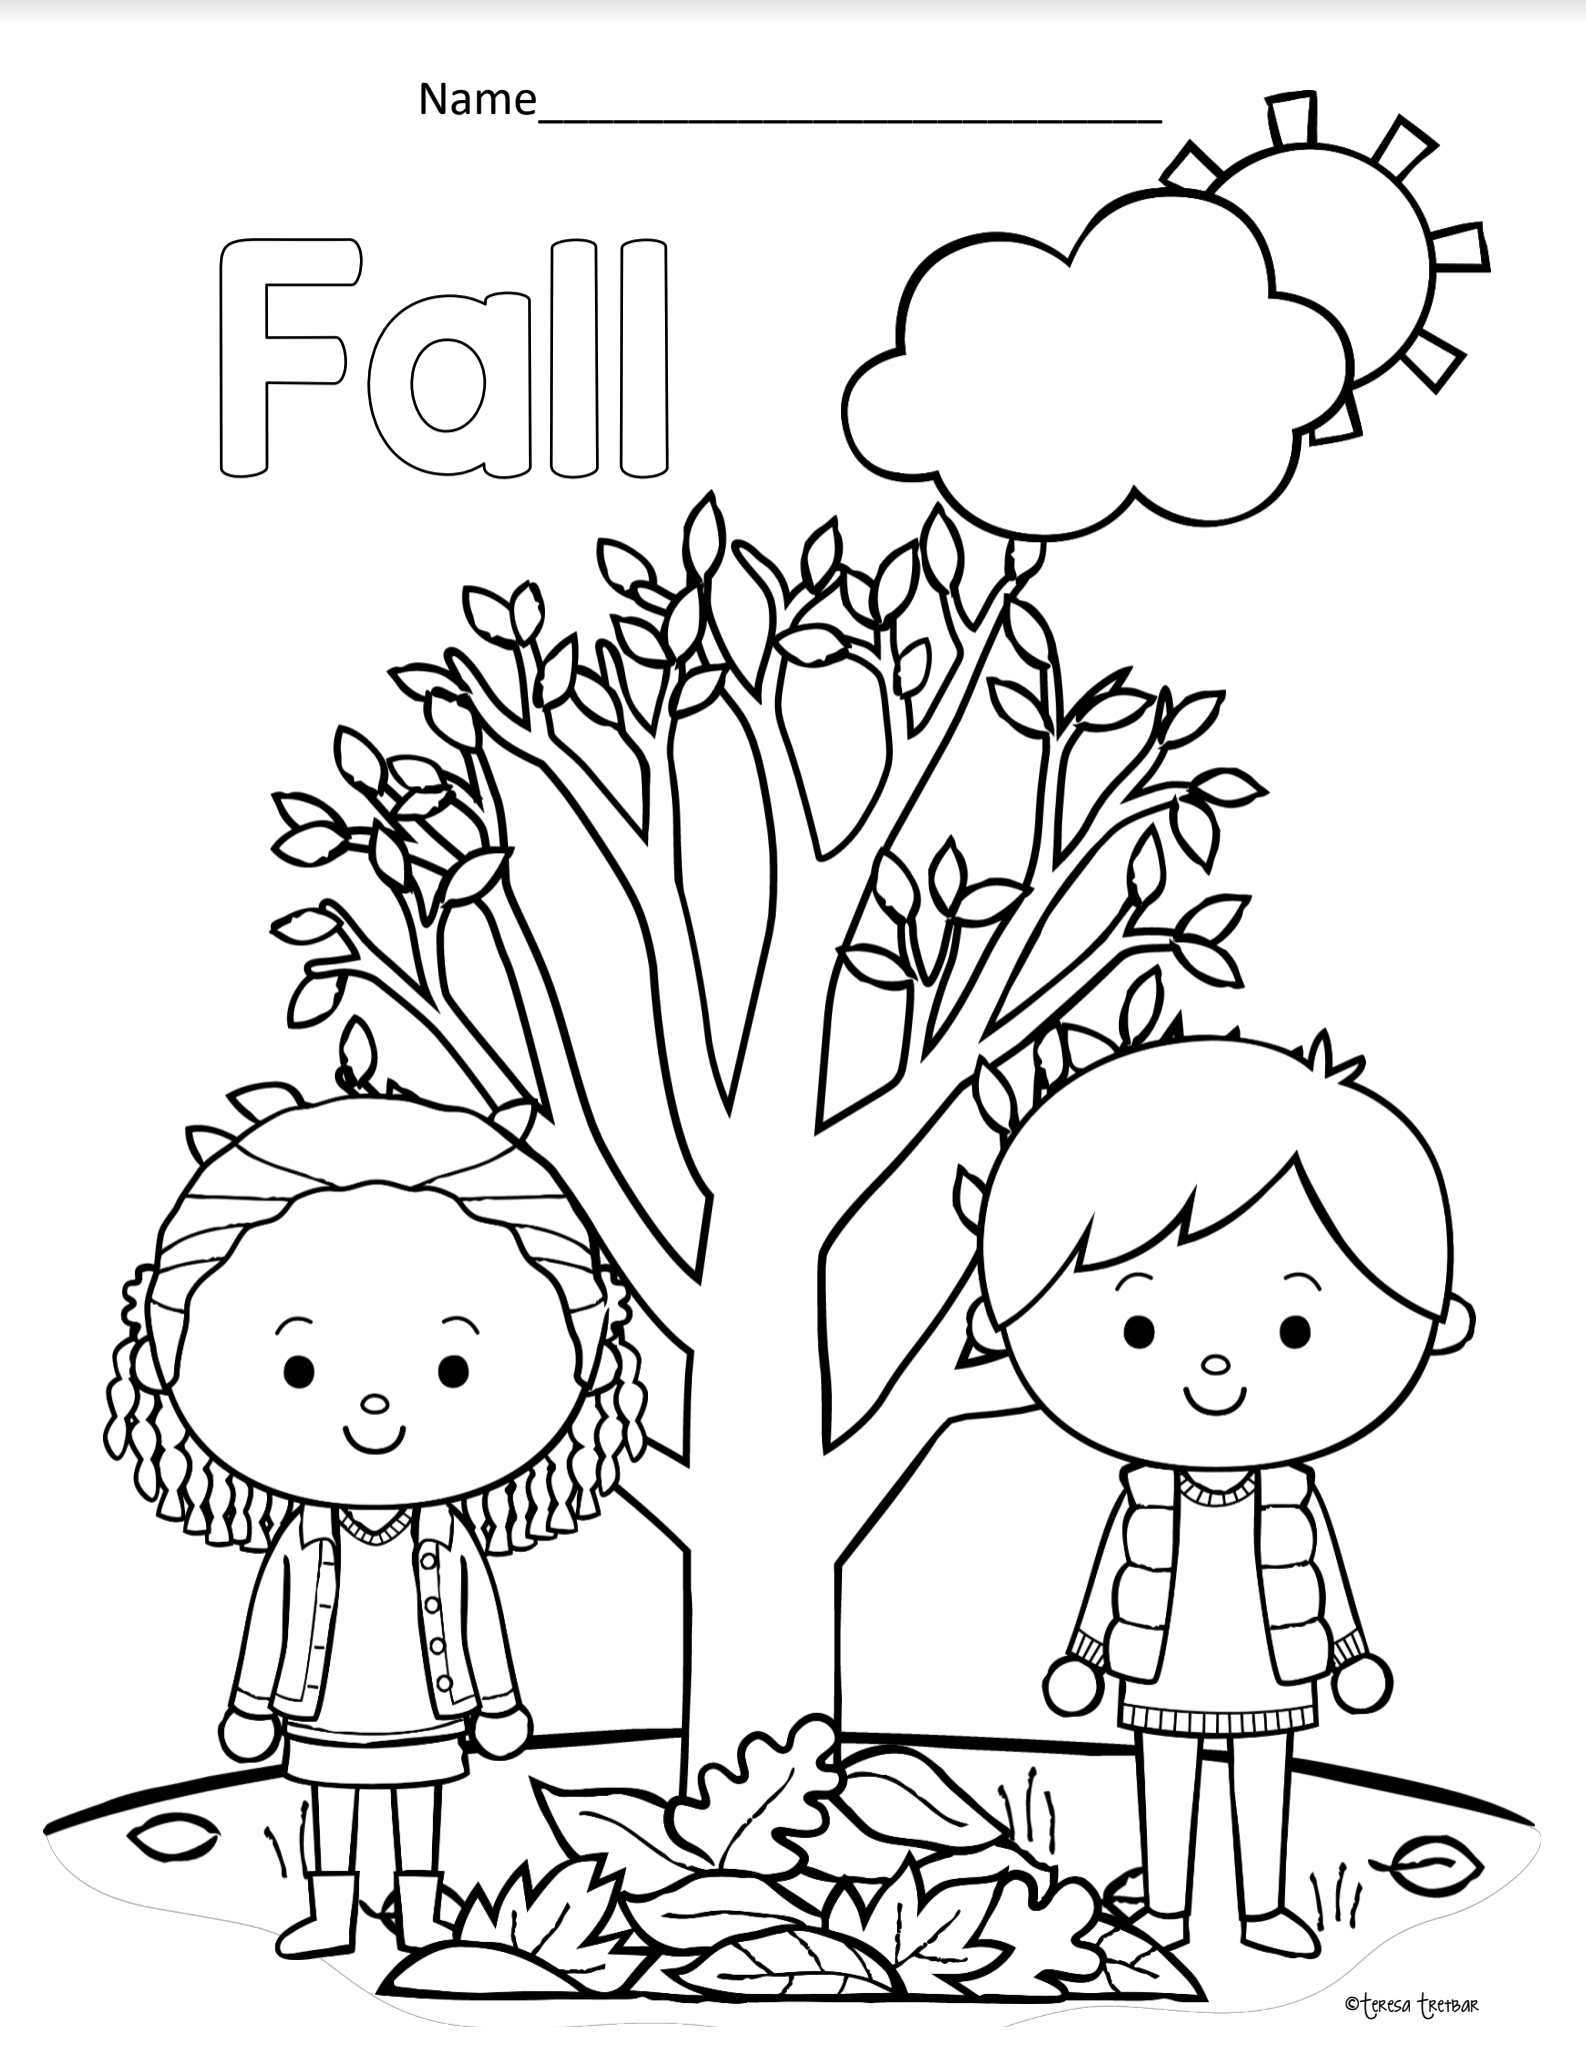 Fall coloring sheet activity â elementary school